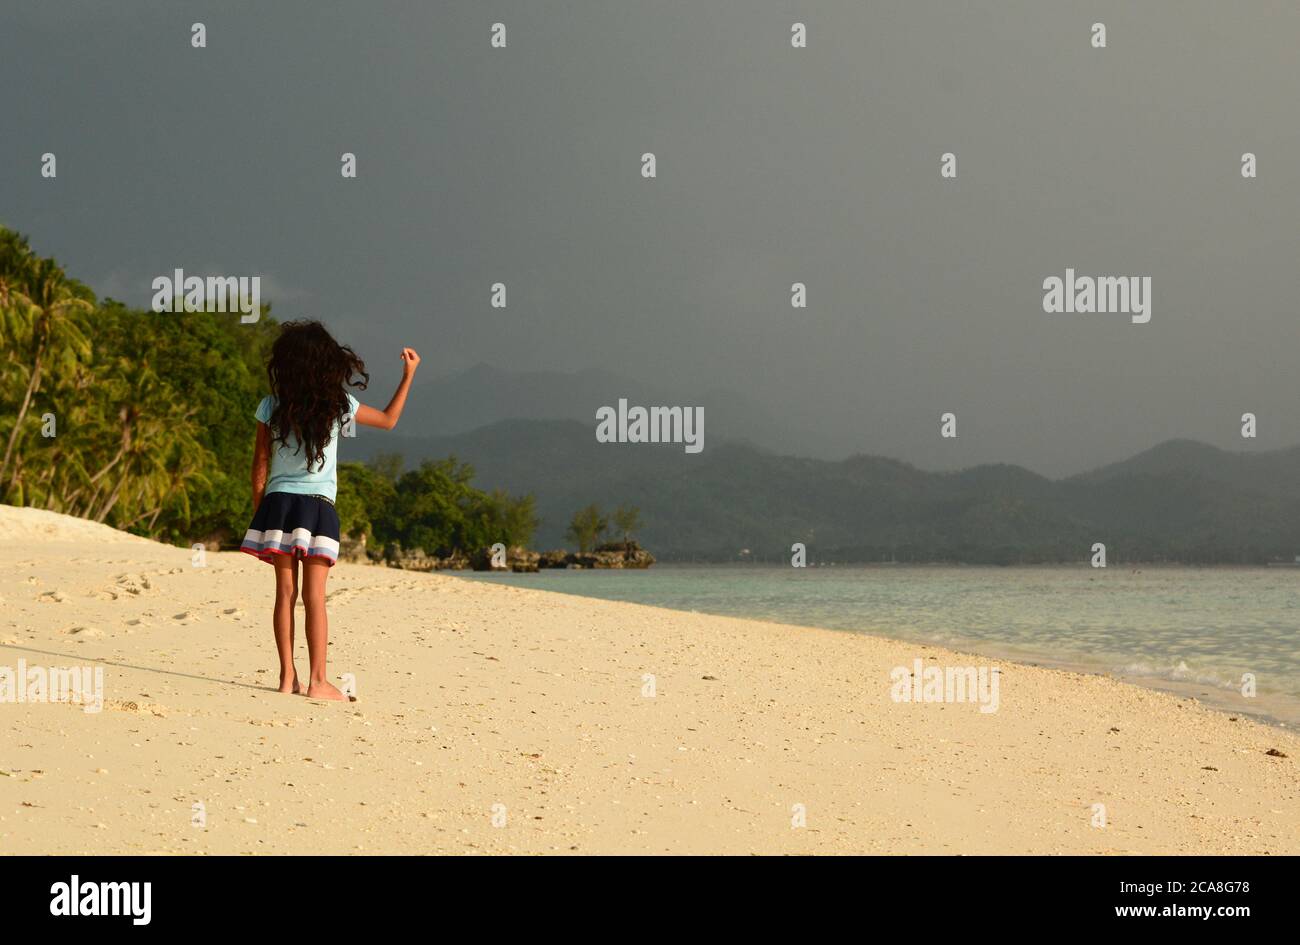 Filipino Girl High Resolution Stock Photography and Images - Alamy